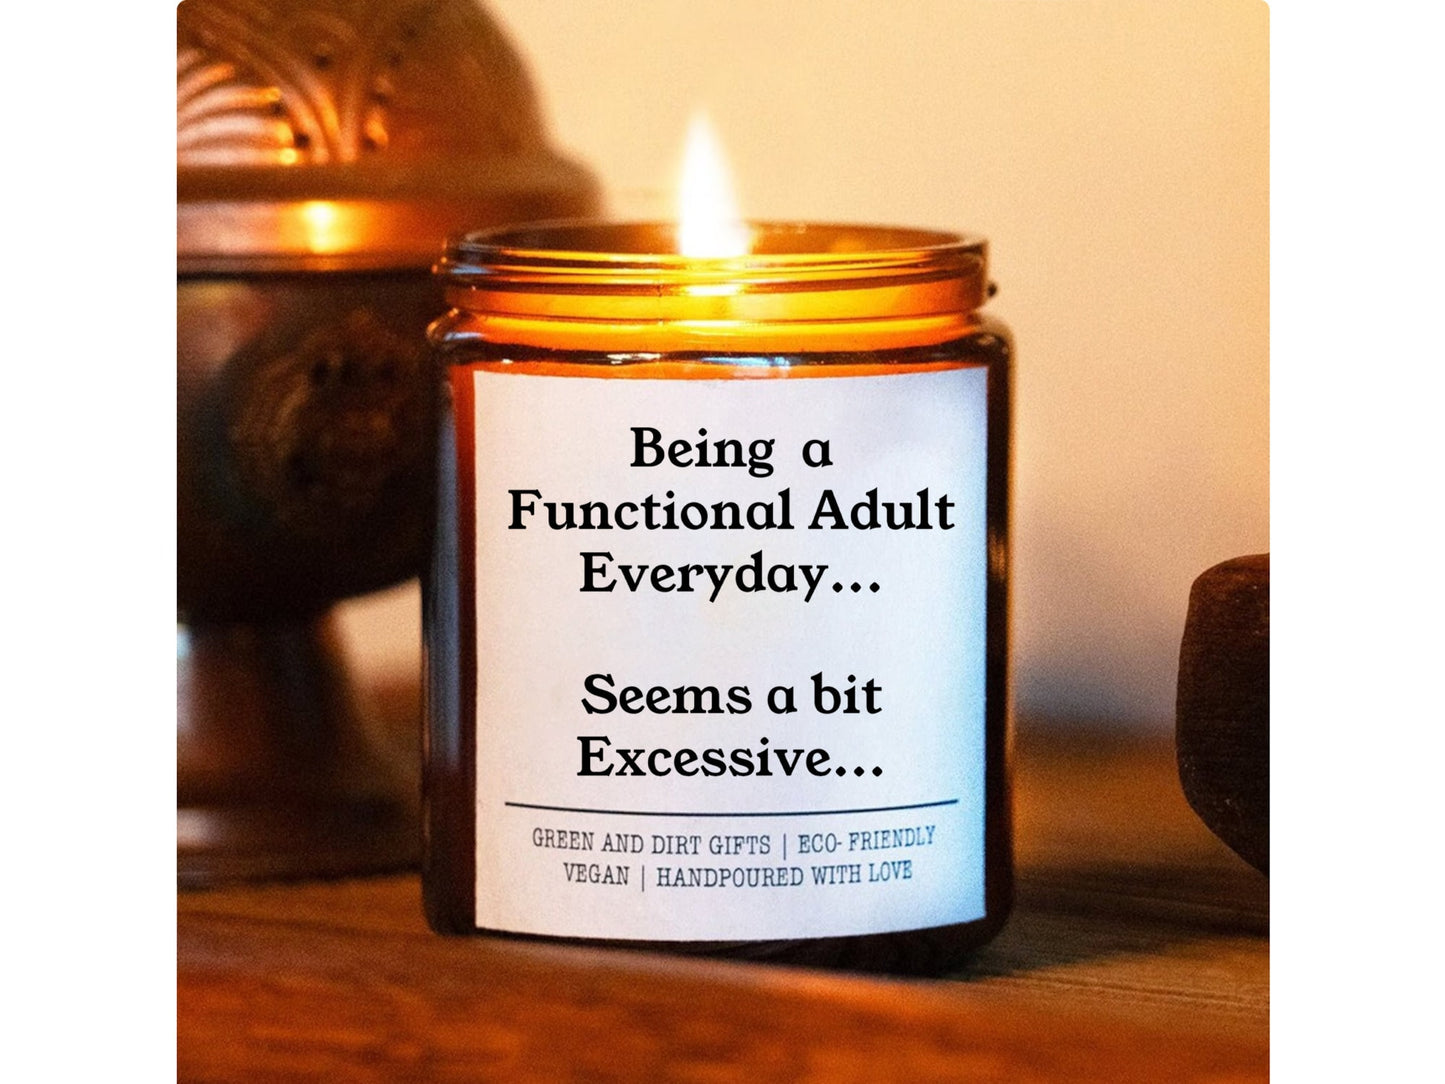 Personalized Candle - 9oz  Being A Functional Adult Everyday Candle (Funny Humor Relatable Witty Home Decor Quote Christmas Creative Gift)